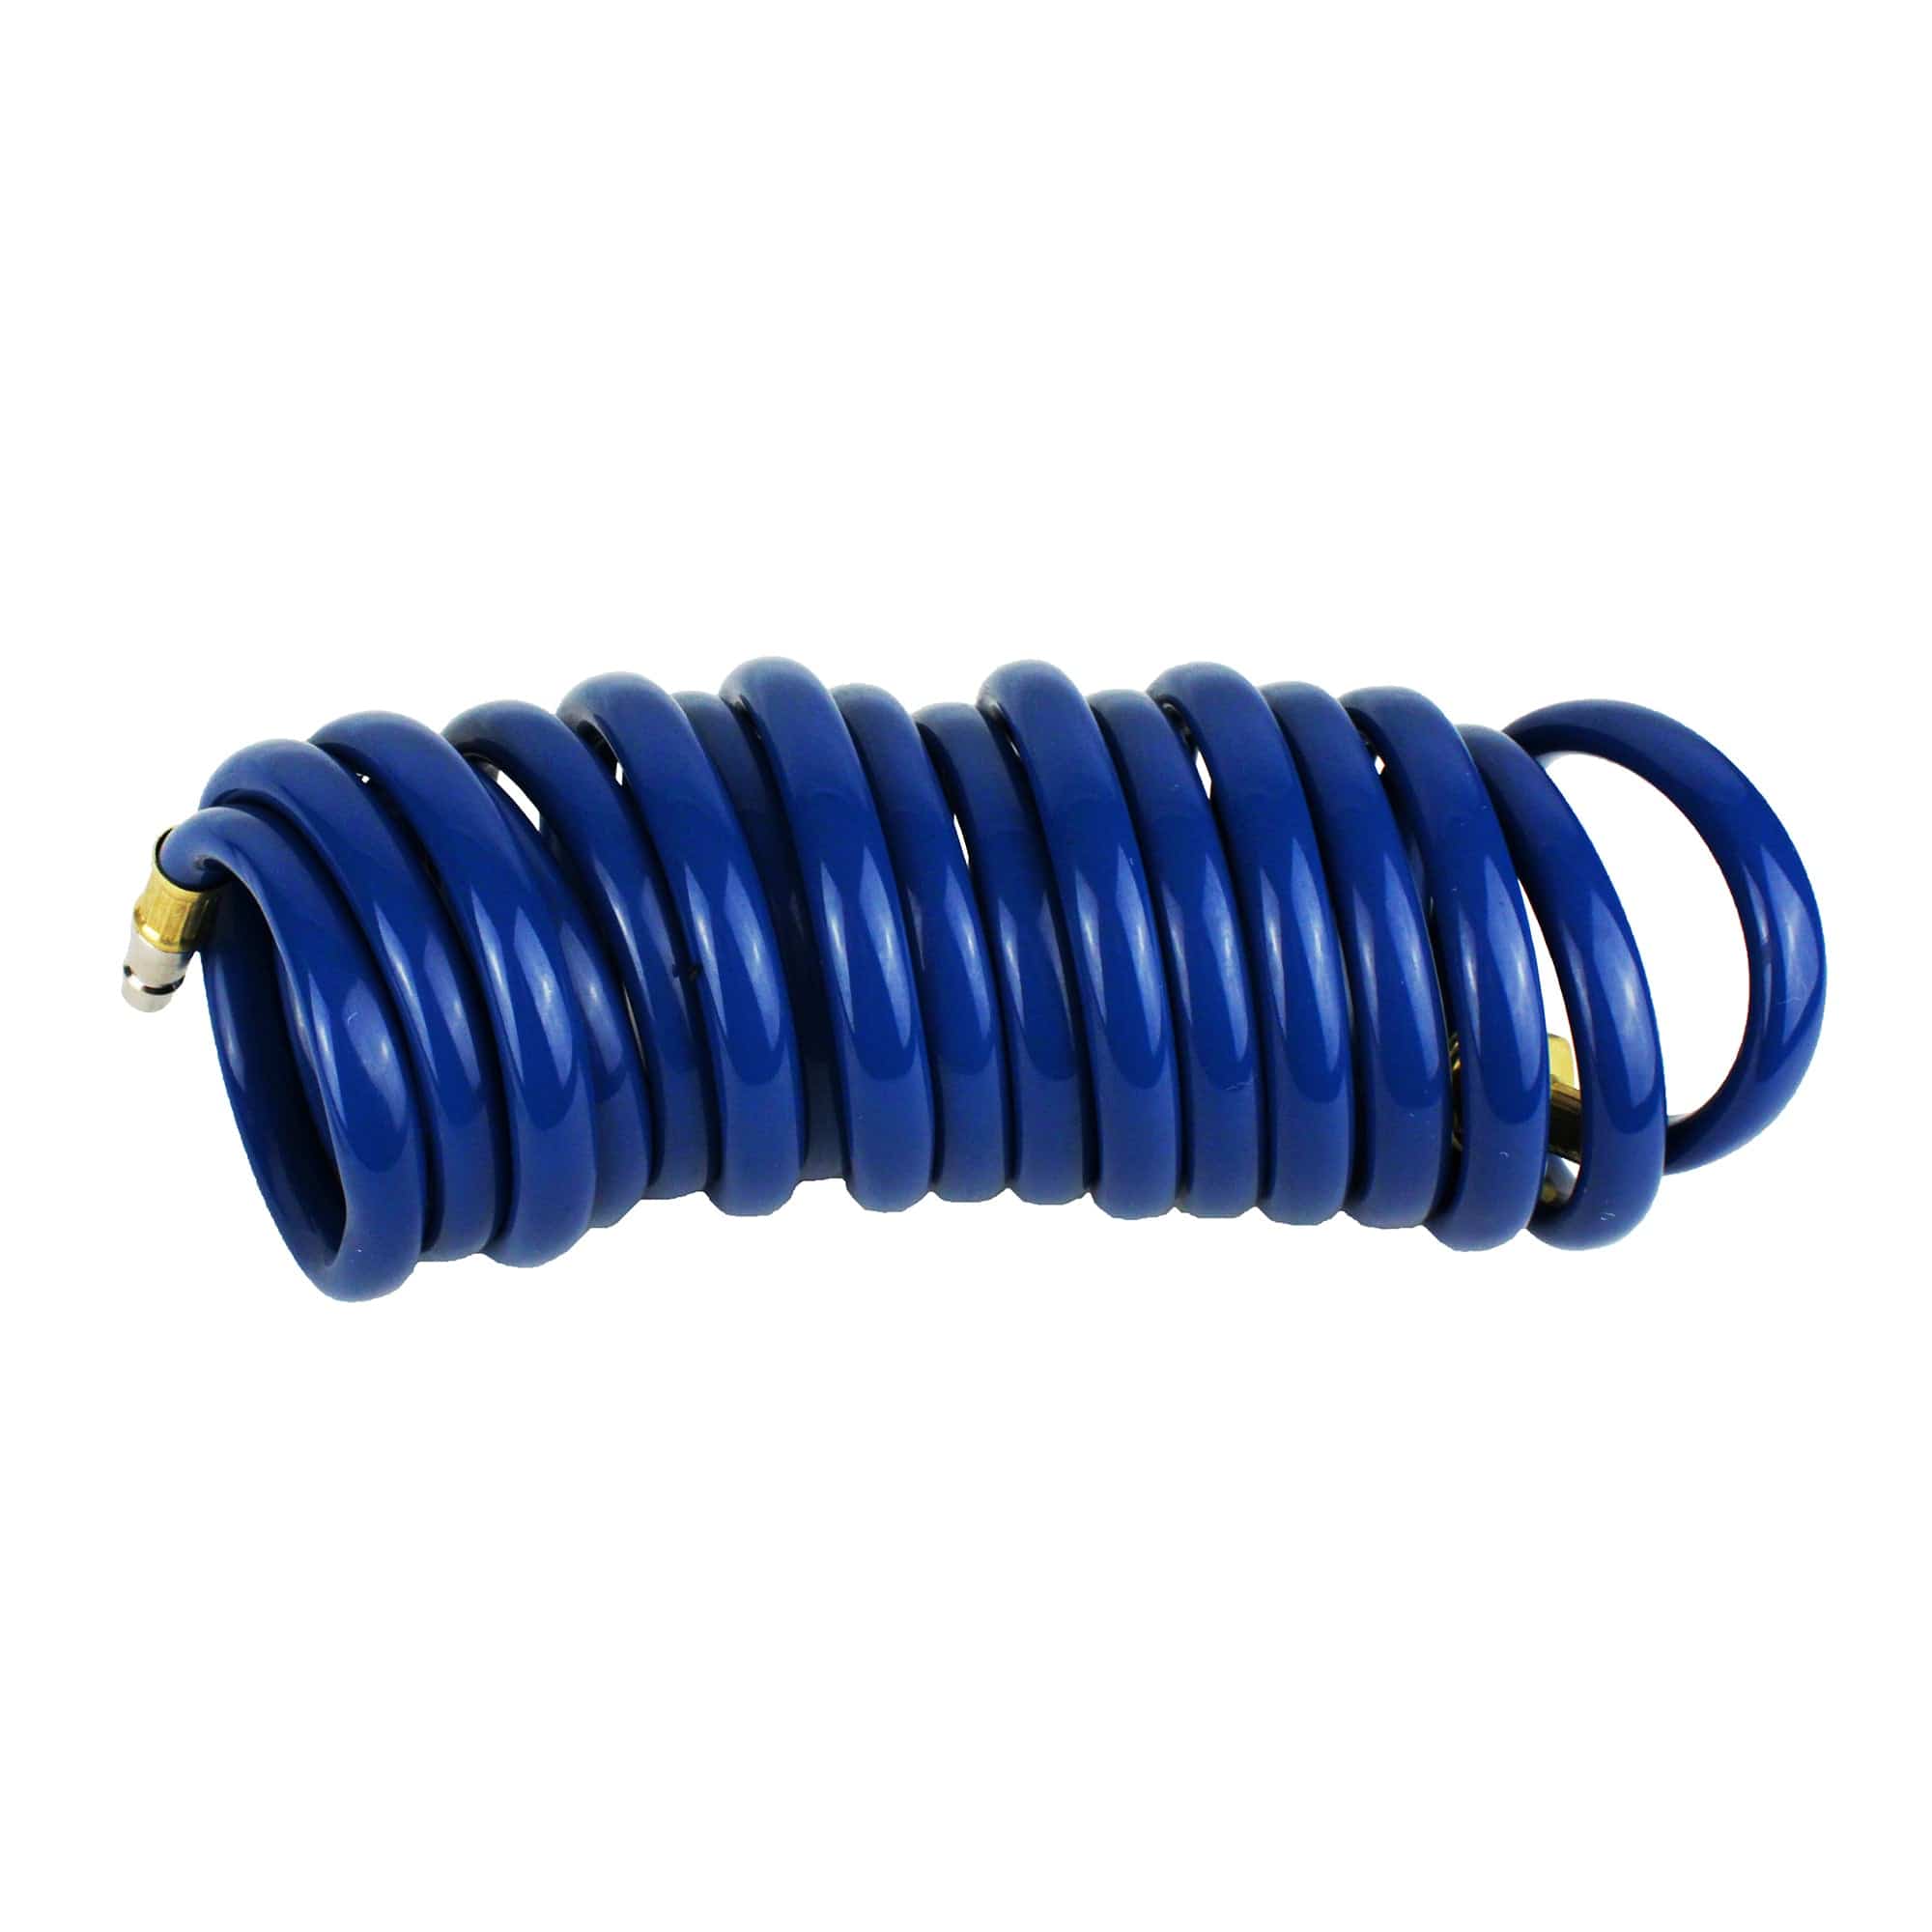 Thetford 94191 B&B Molders (601-019-94191) 15′ Coil Hose with Quick Disconnect